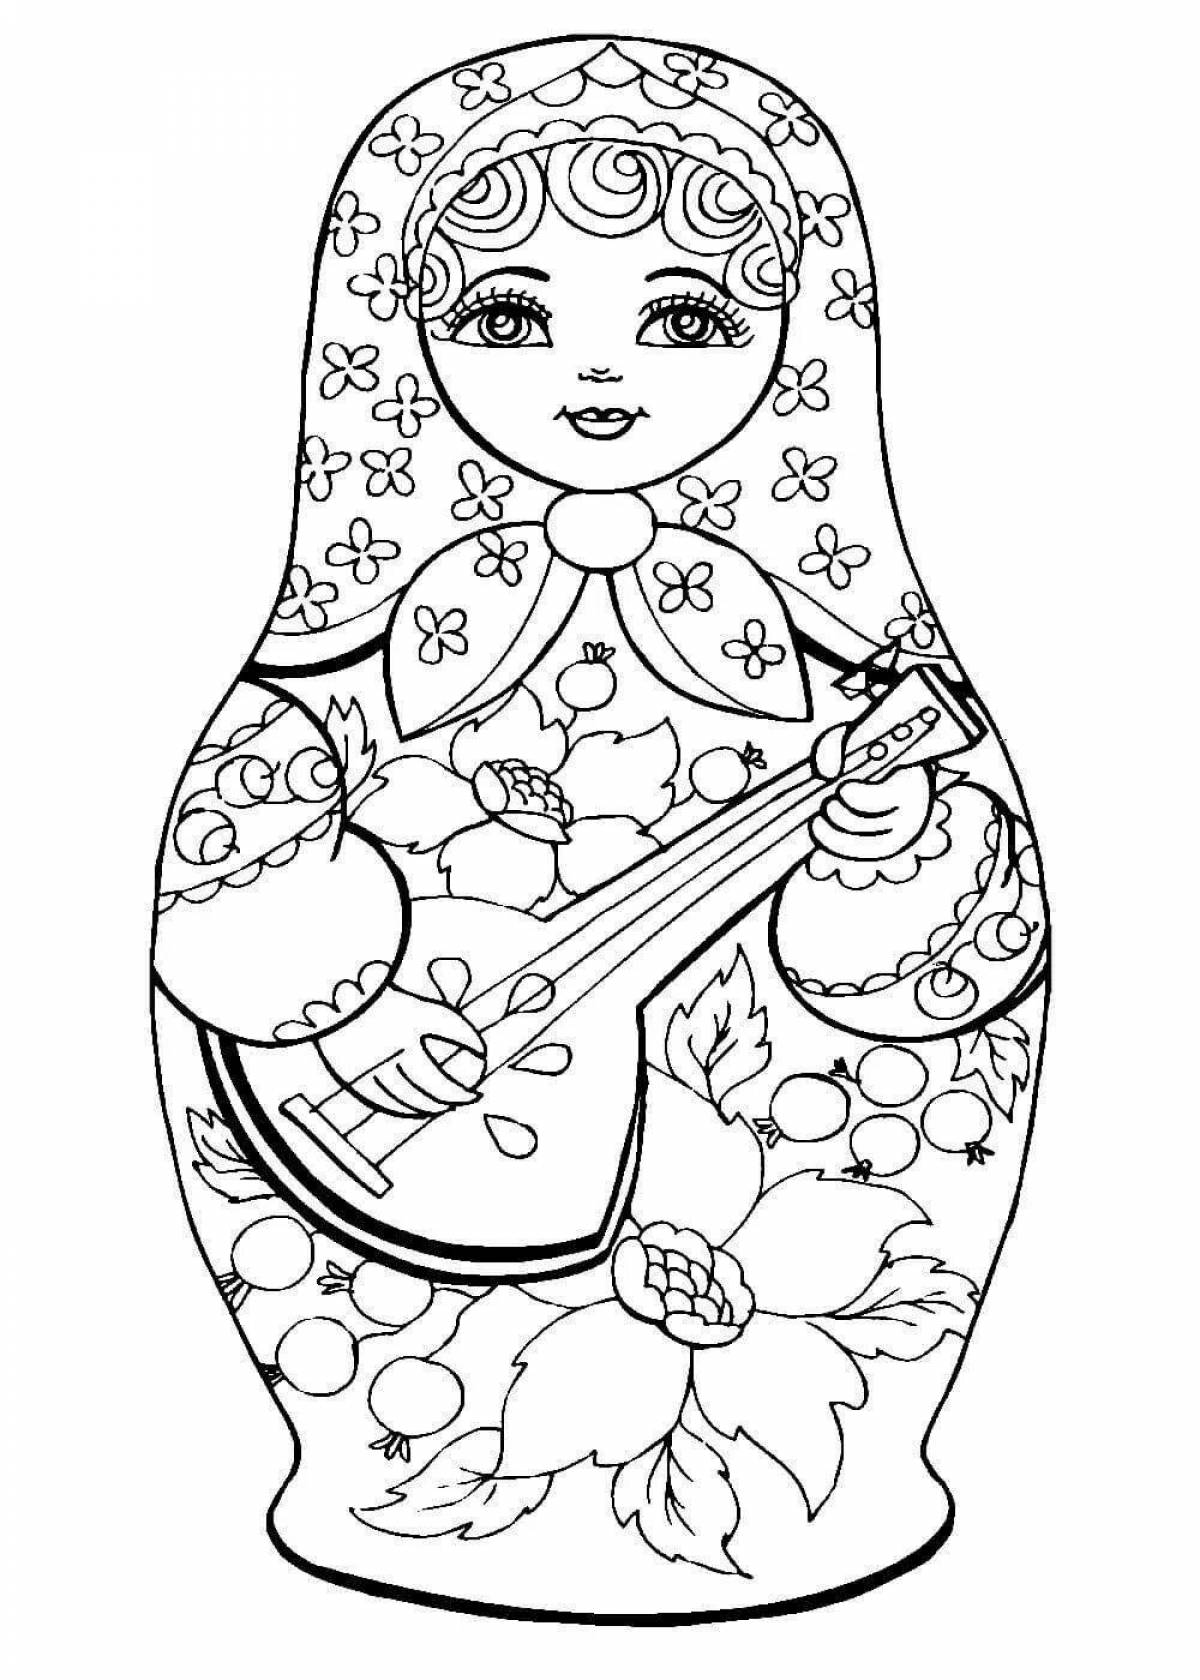 Colorful Russian matryoshka coloring book for children 6-7 years old